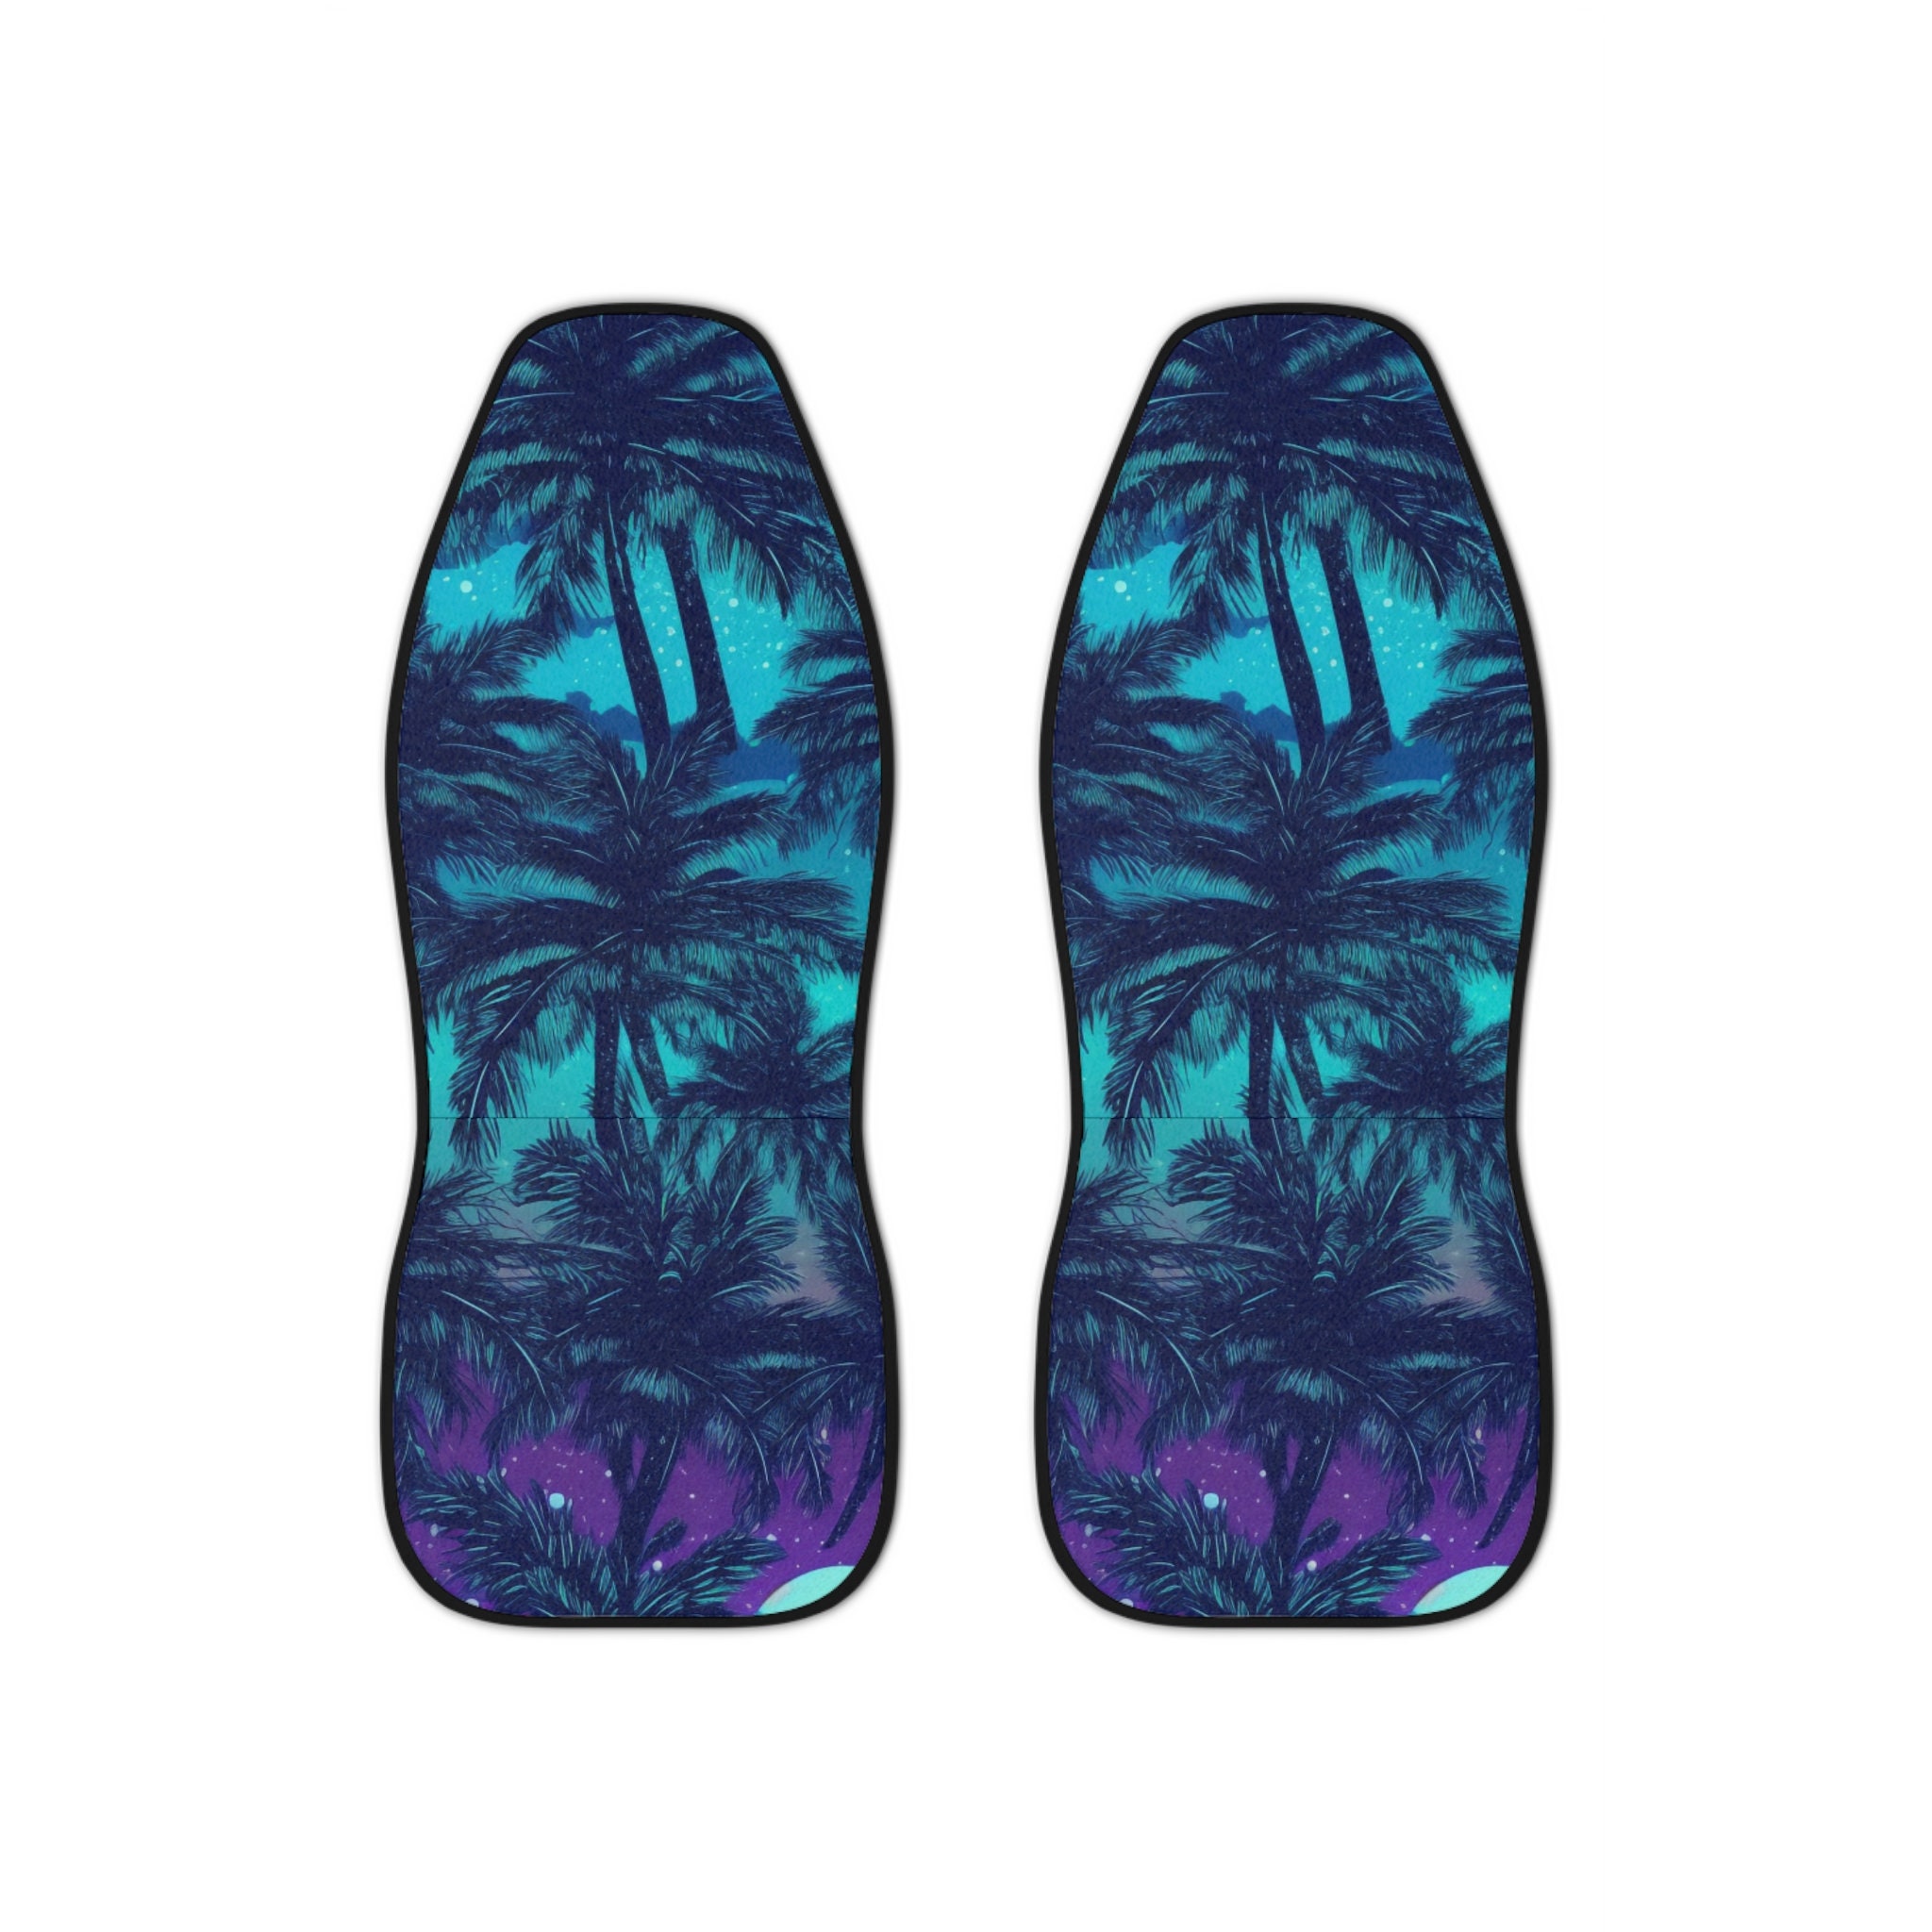 Aesthetic car seat covers, miami vice tropical feel seat covers